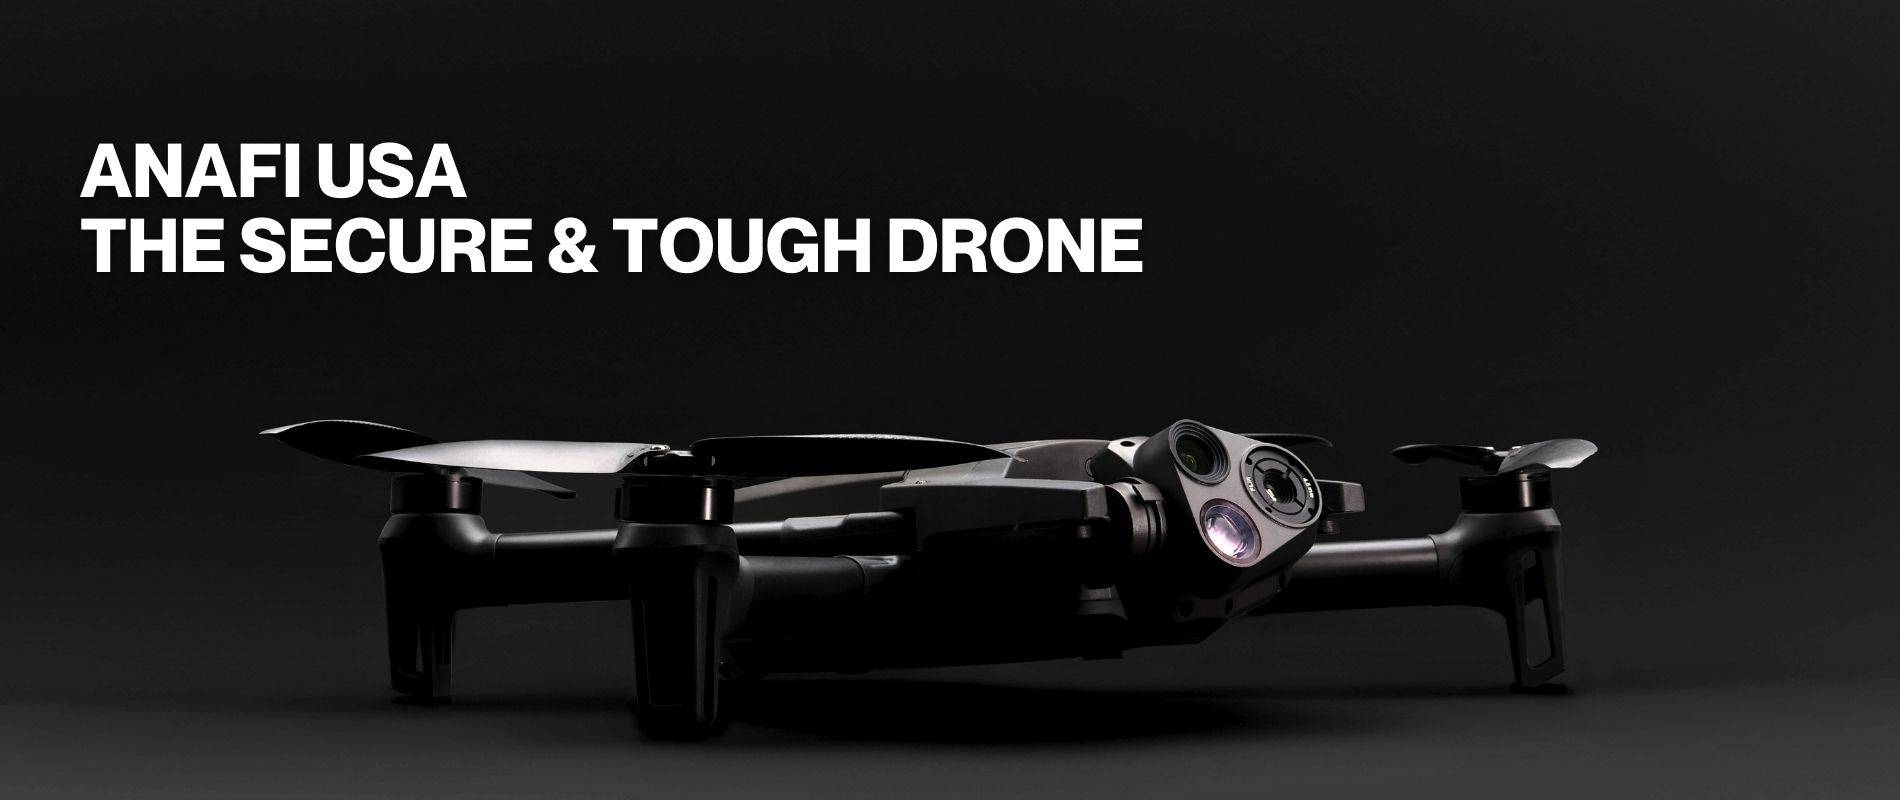 Secure and tough drone